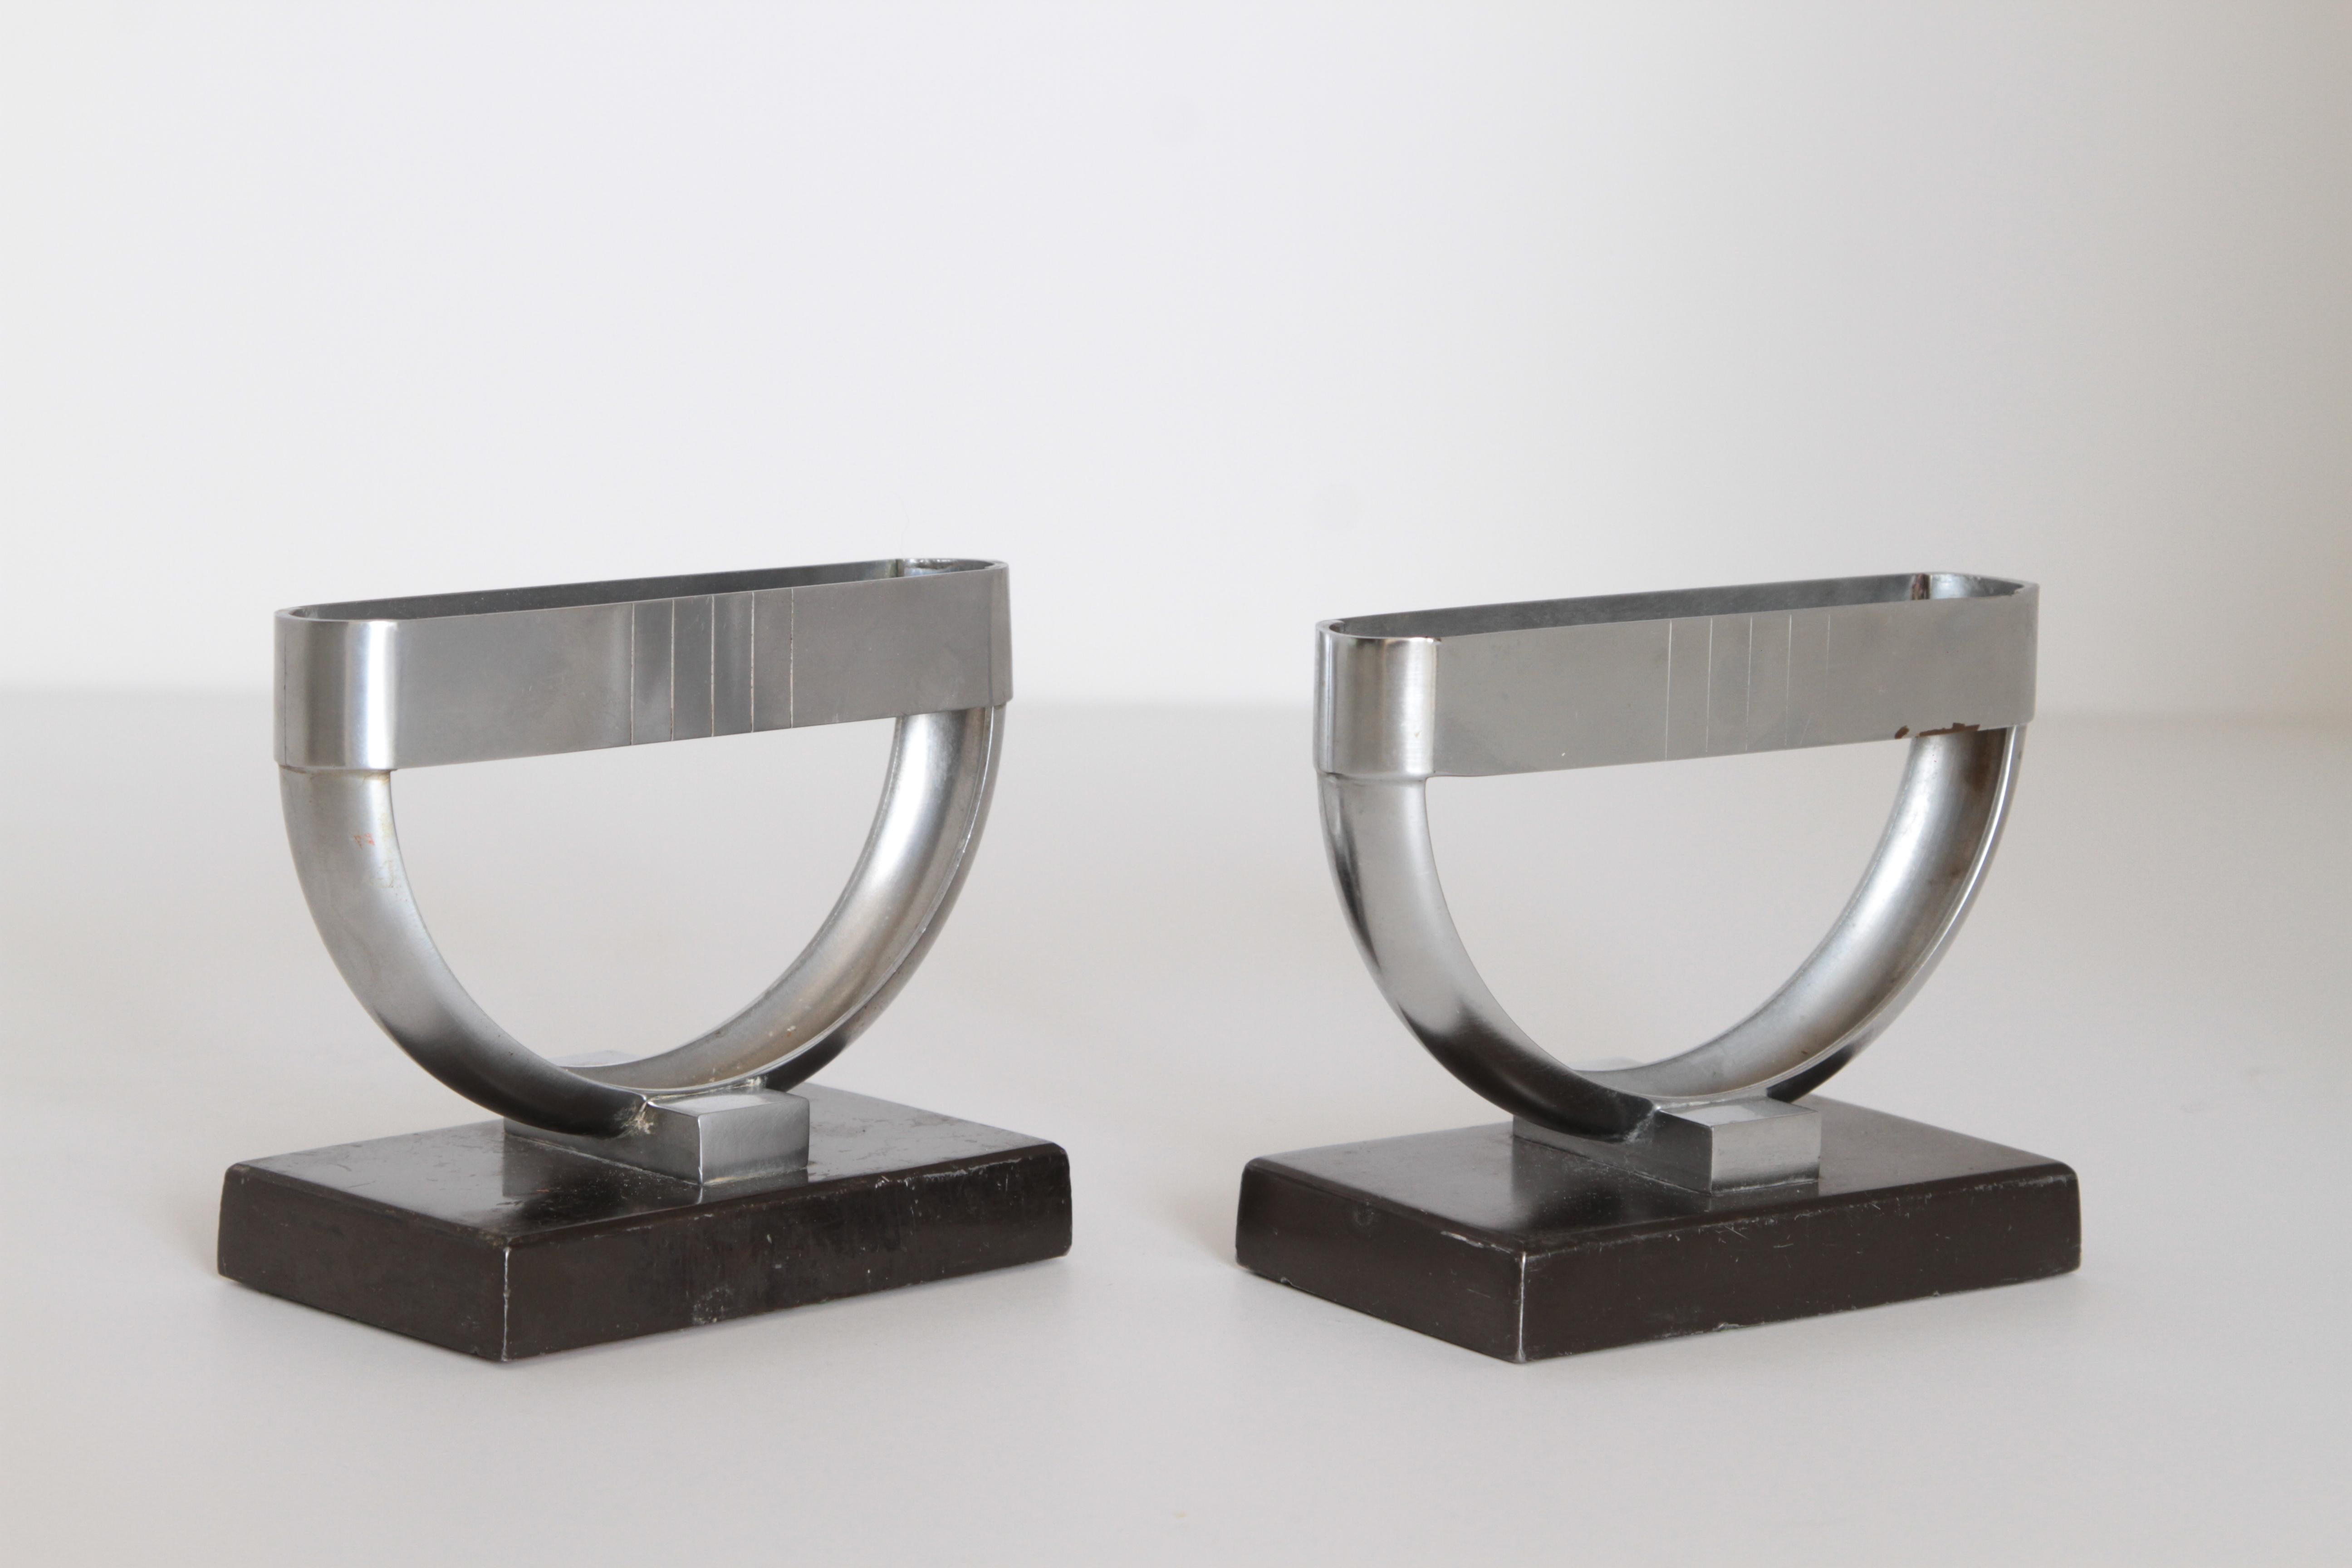 Machine Age Art Deco  Norman Bel Geddes Pair Revere Crescent Candlestick Holders For Sale 2